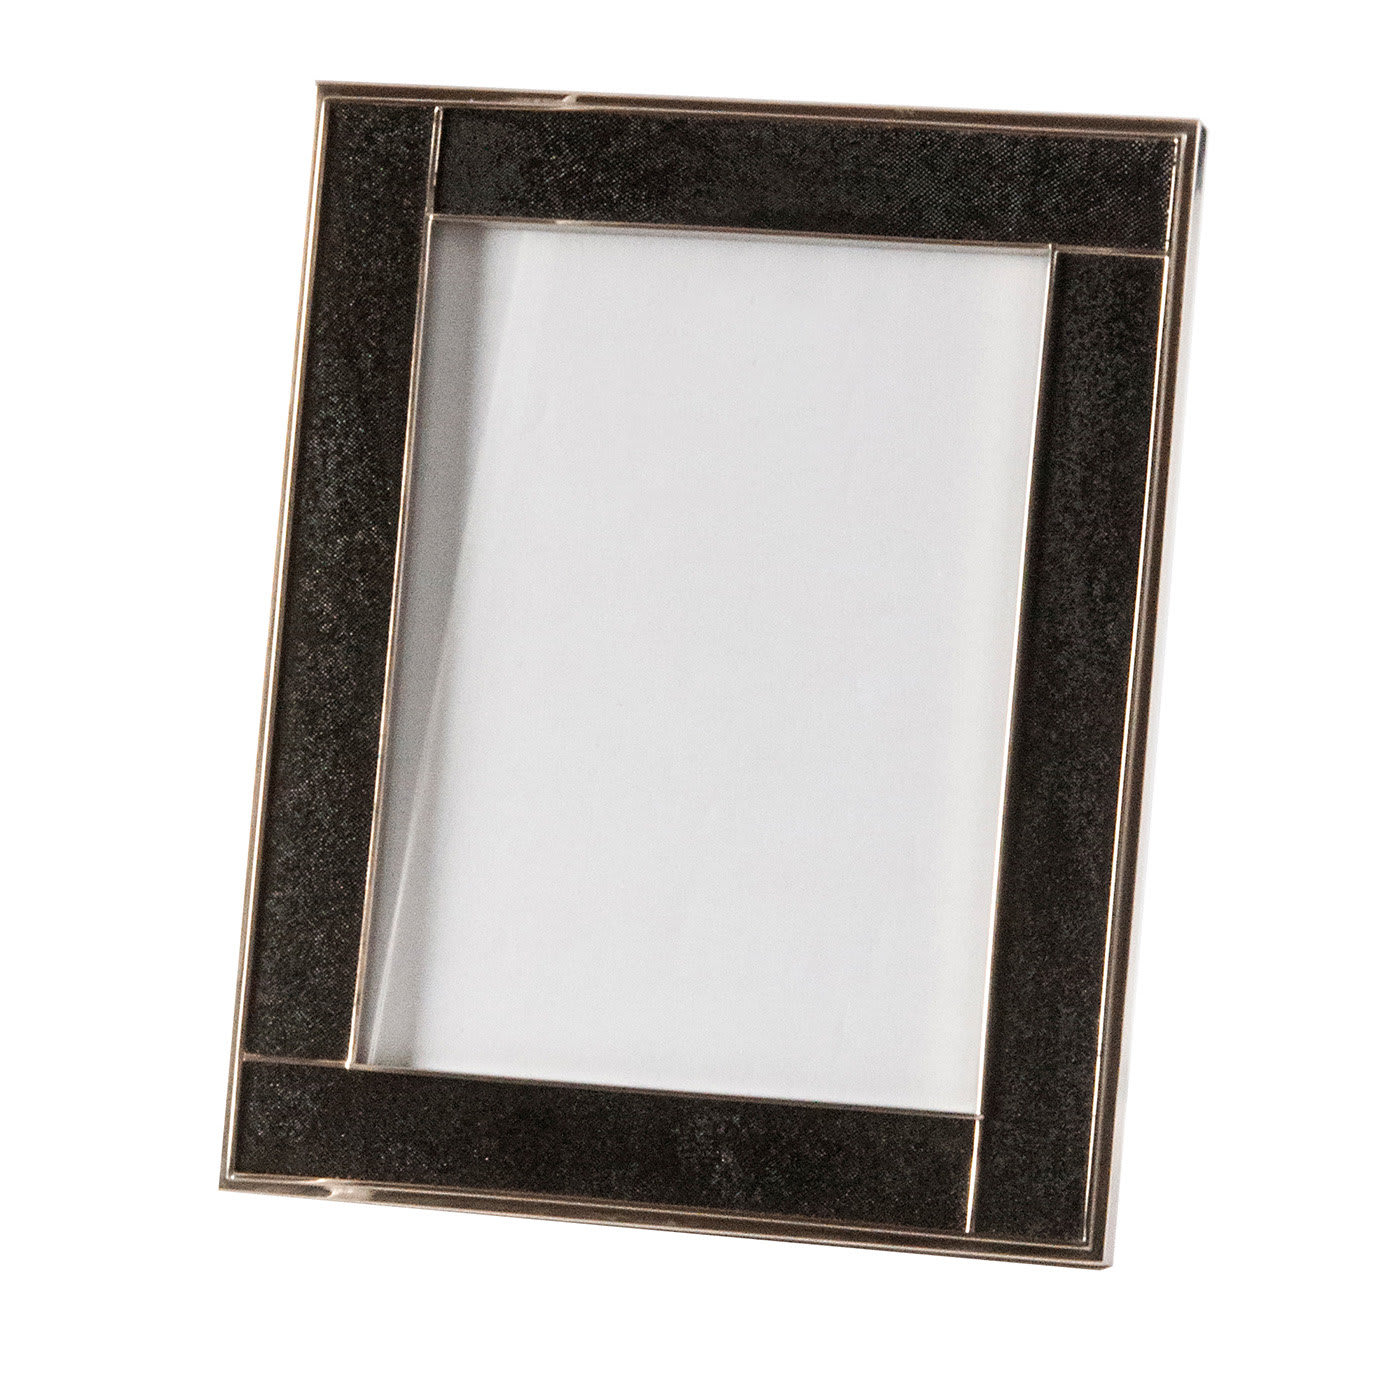 Galucharme Black Picture Frame by Nino Basso  - Design Center 1991